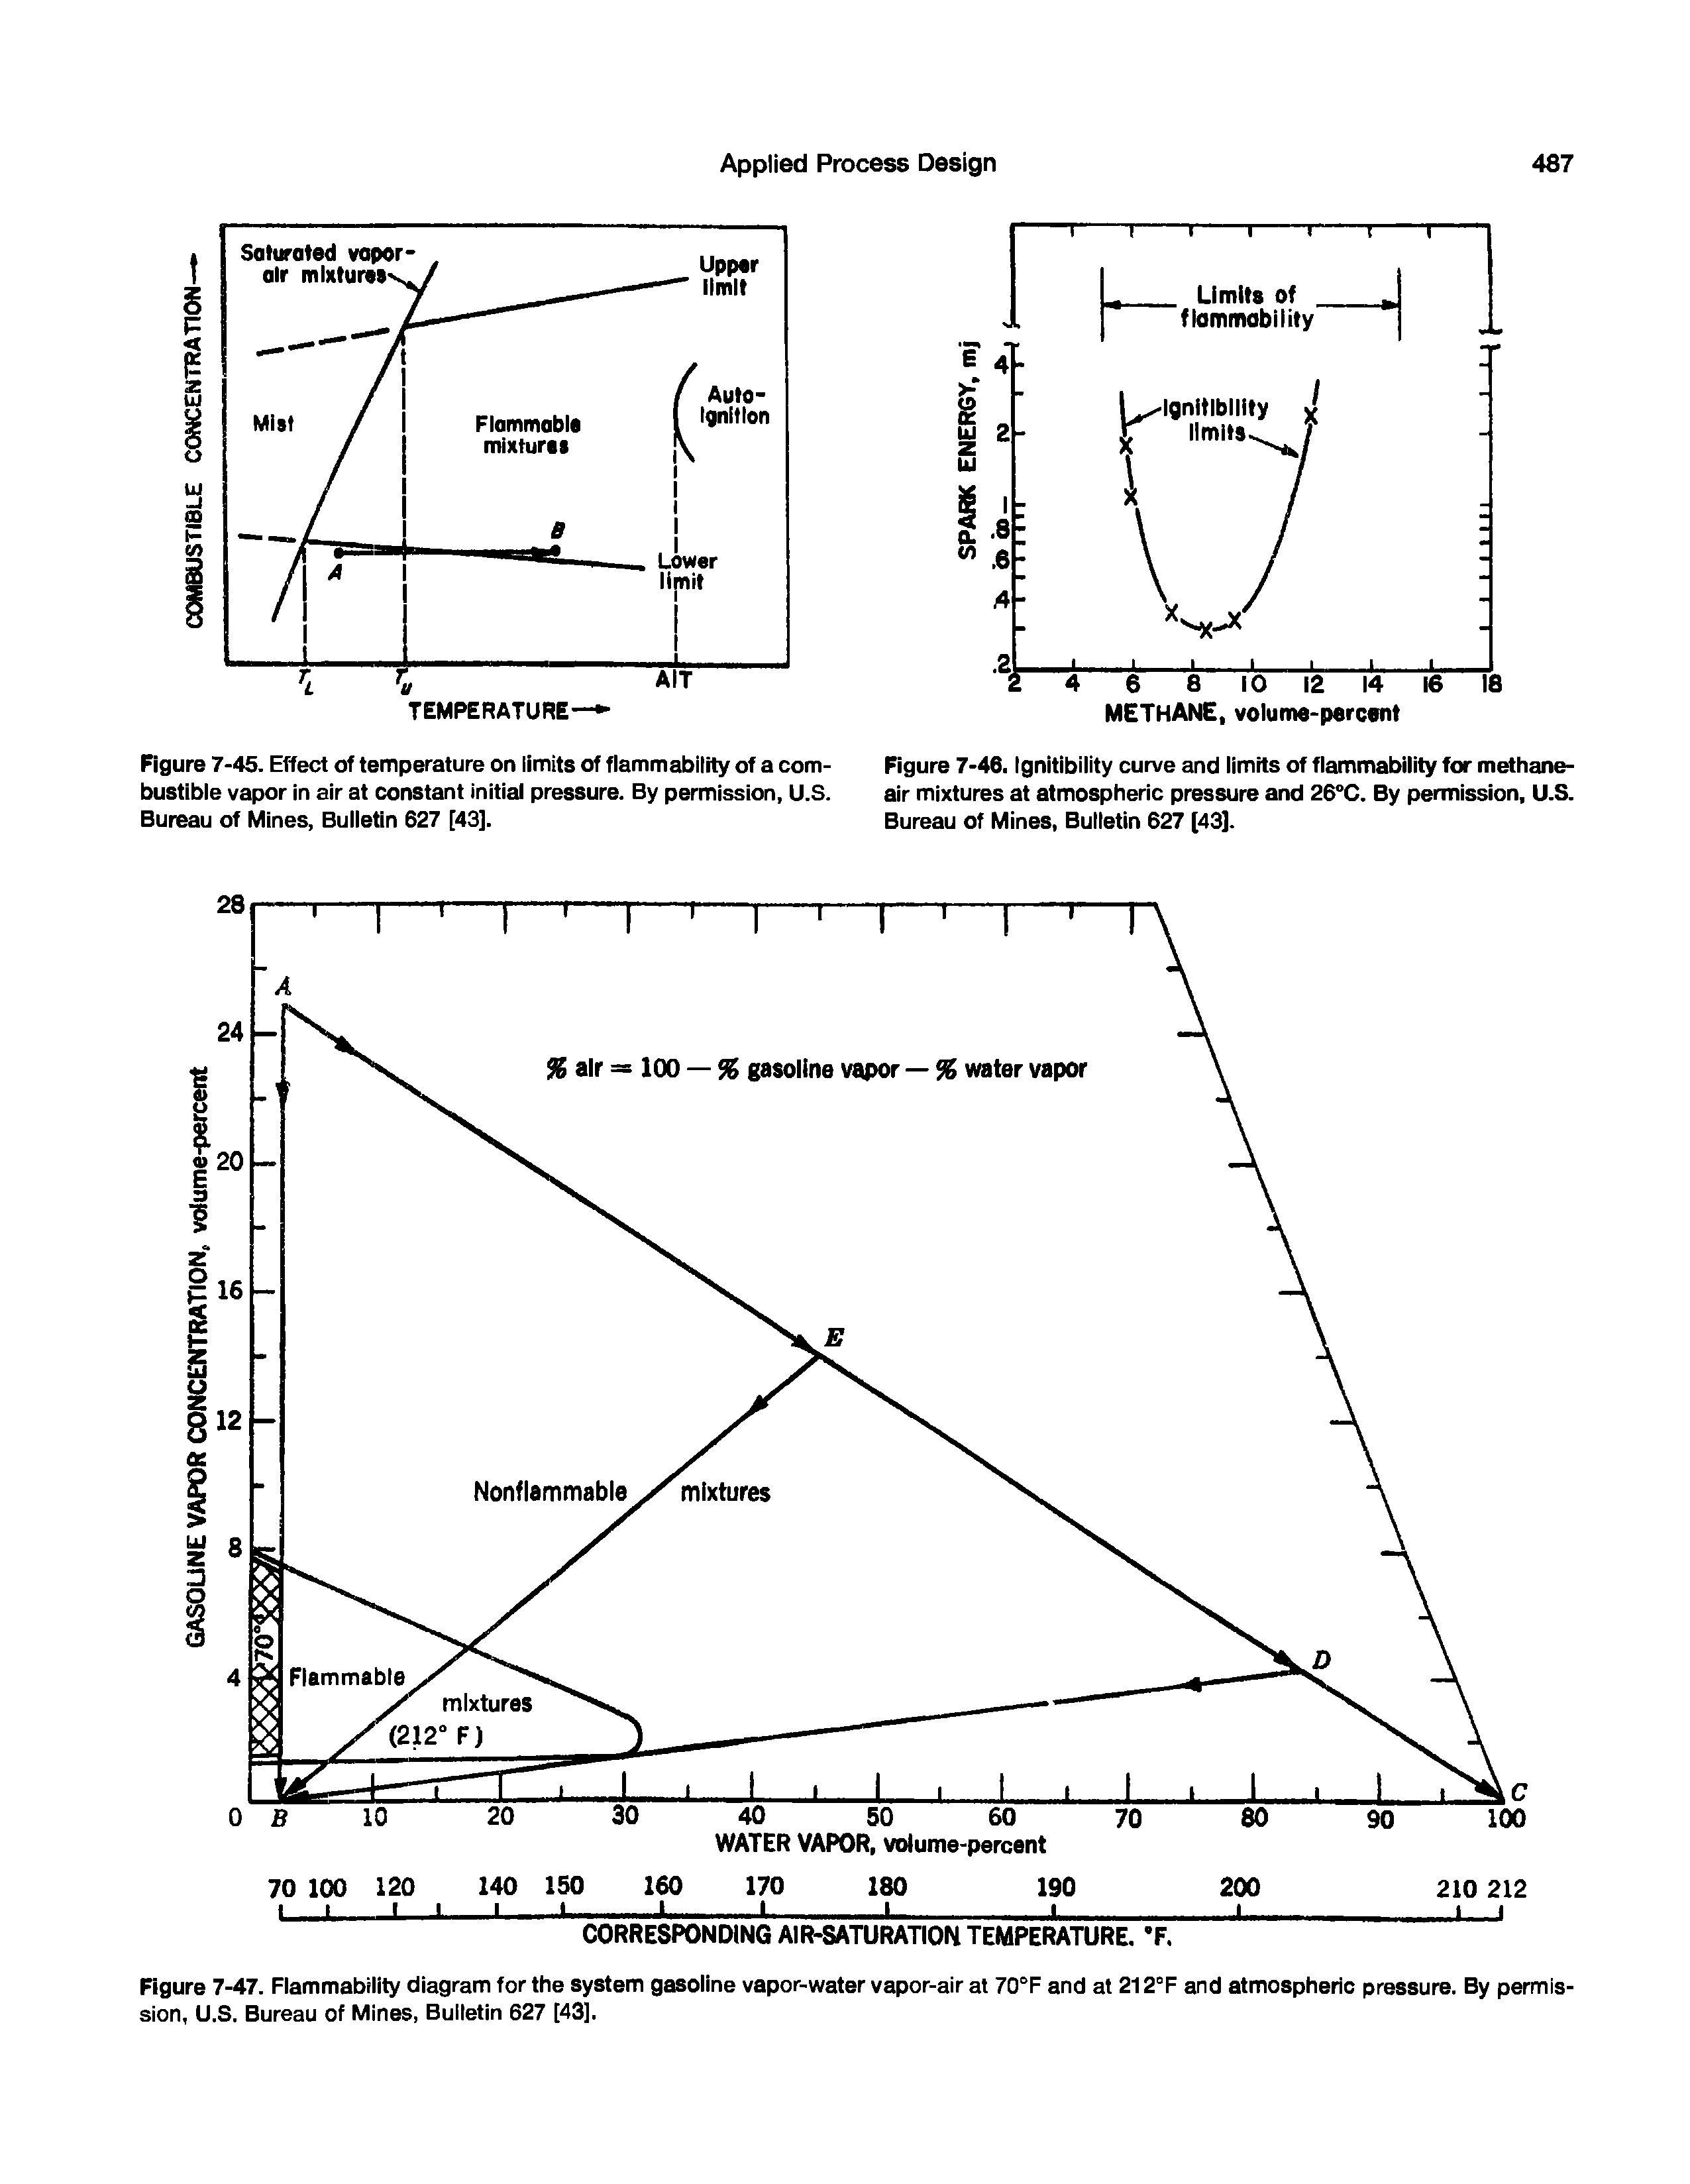 Figure 7-47. Flammability diagram for the system gasoline vapor-water vapor-air at 70°F and at 212°F and atmospheric pressure. By permission, U.S. Bureau of Mines, Bulletin 627 [43],...